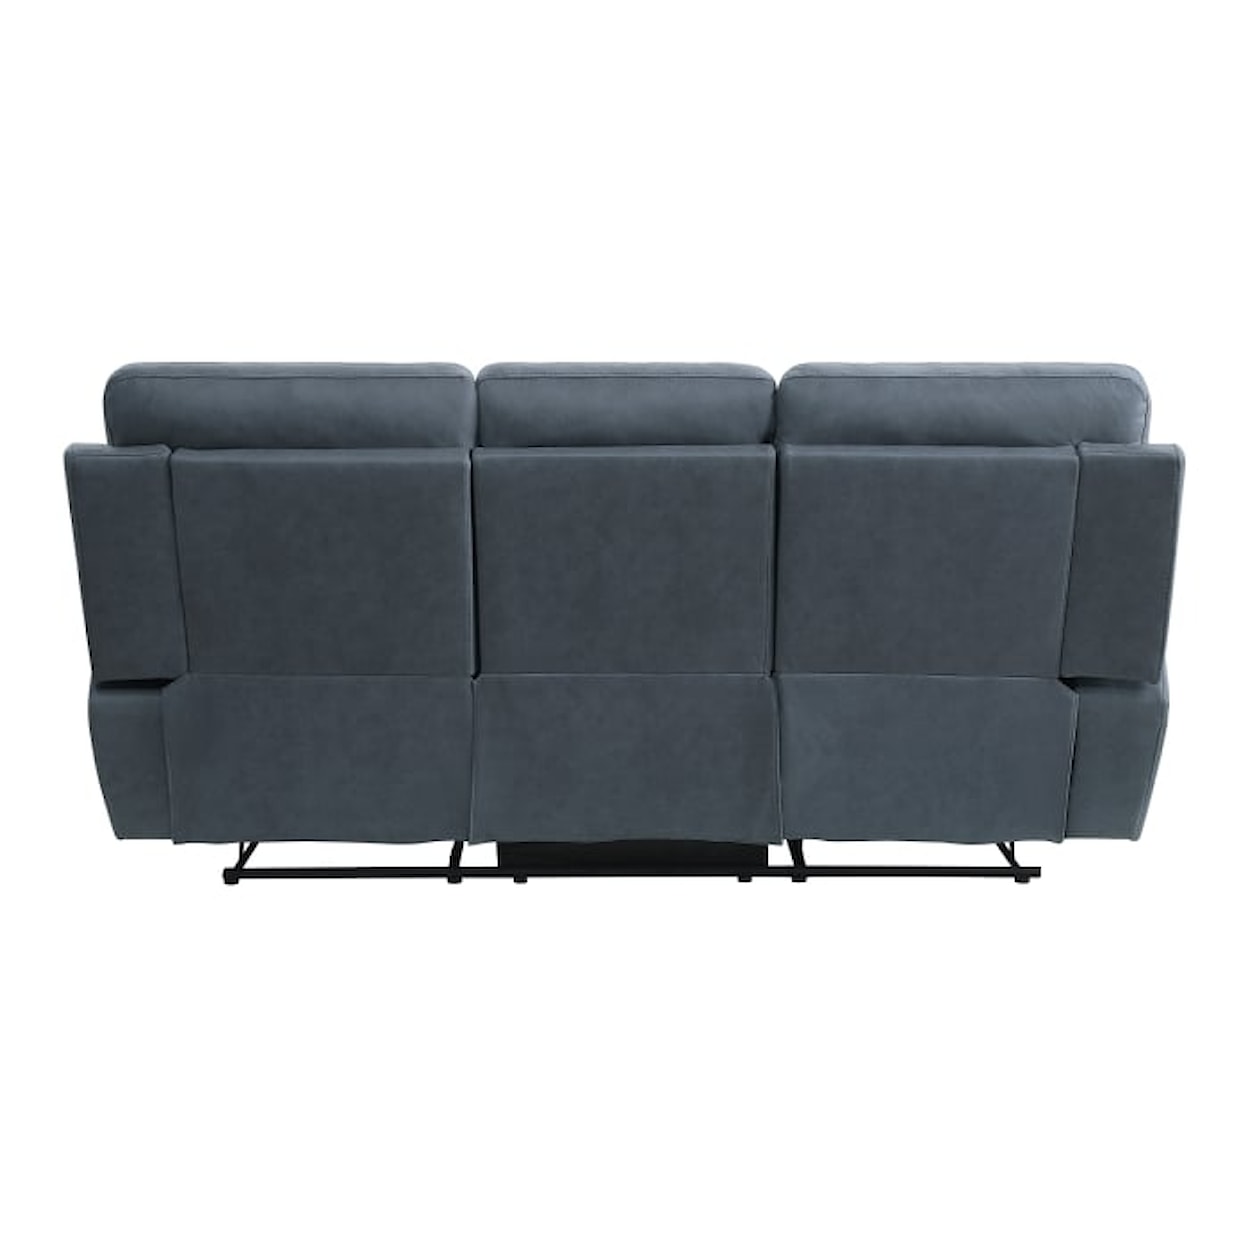 Homelegance Furniture Clifton Double Reclining Sofa